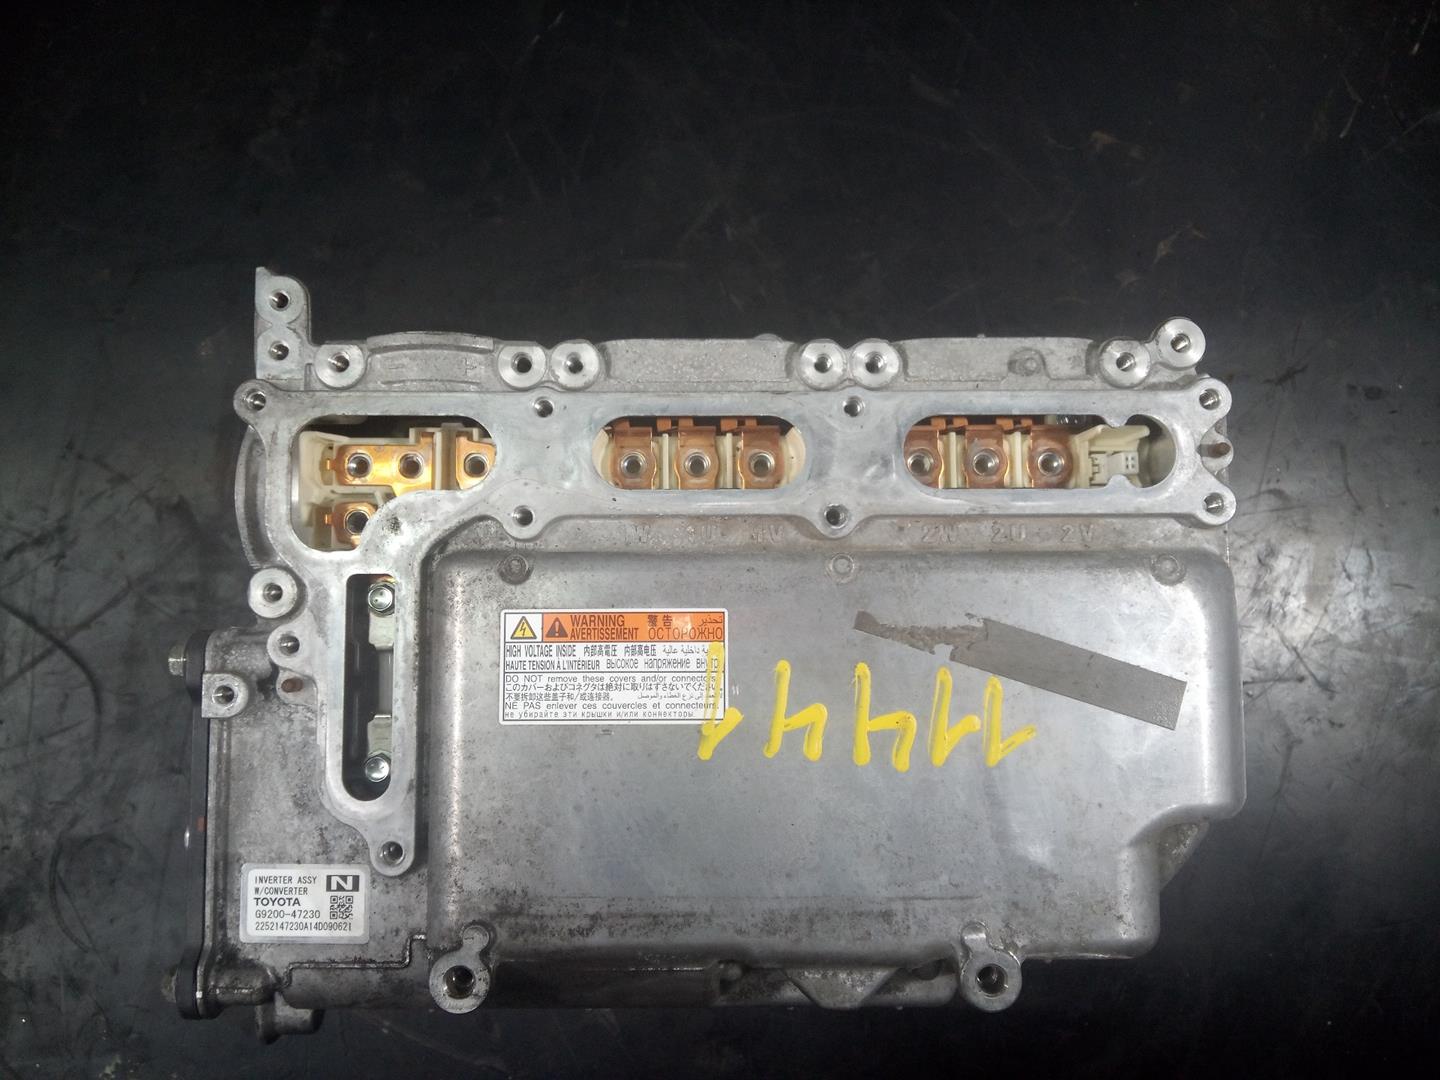 TOYOTA Prius 3 generation (XW30) (2009-2015) Battery G920047230, 2252147230A14D090621 23287548